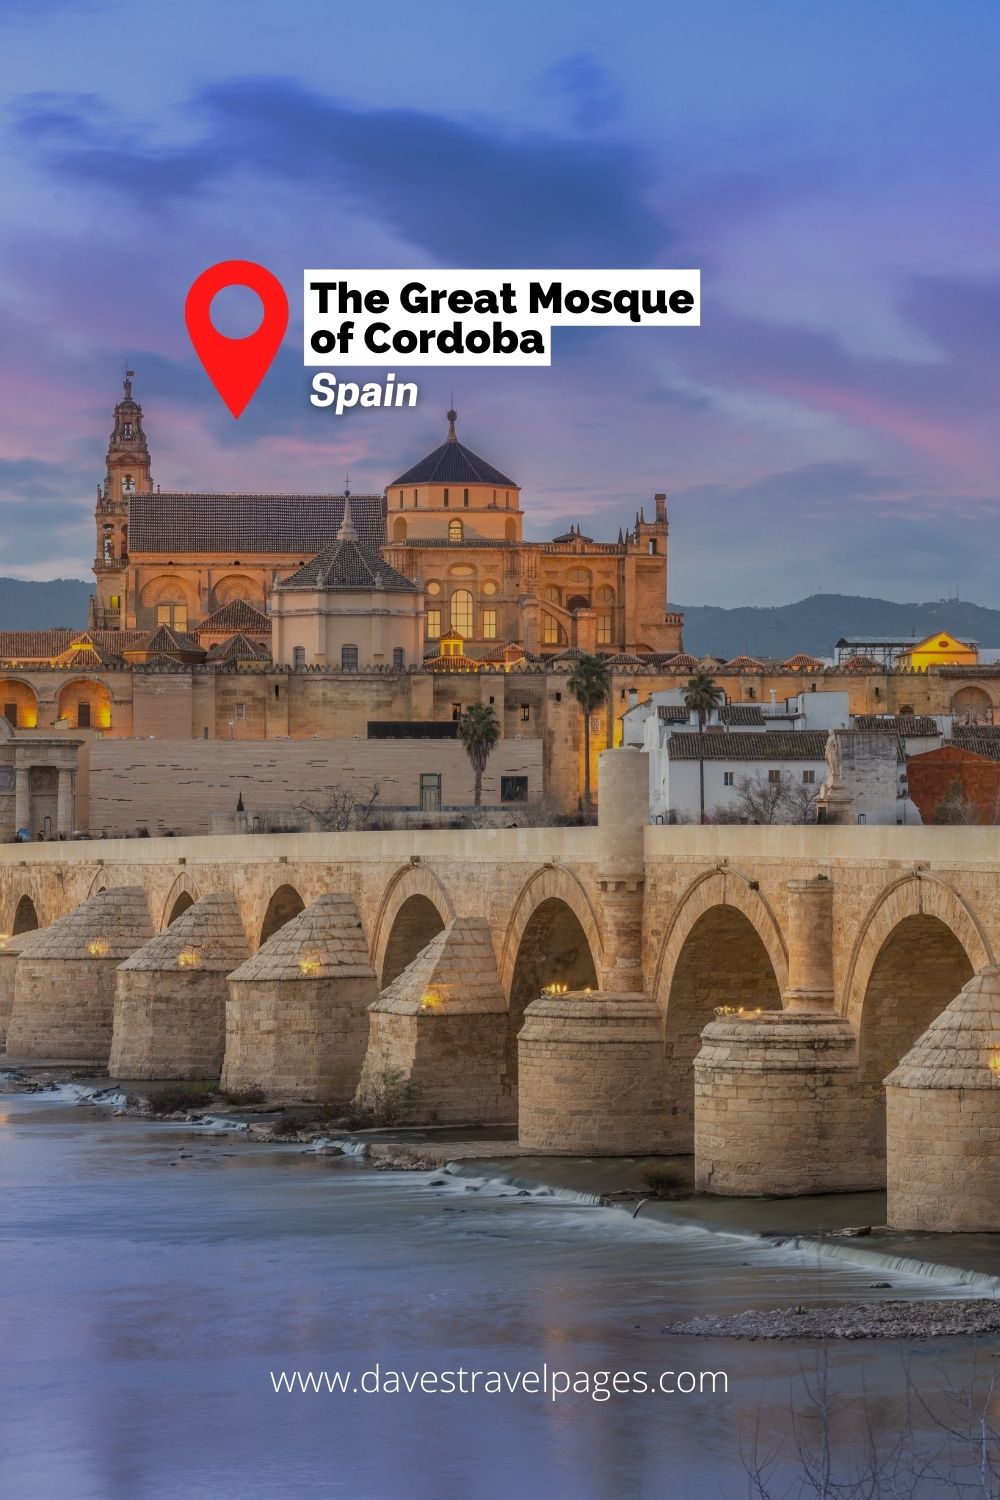 The Great Mosque of Cordoba - Spain